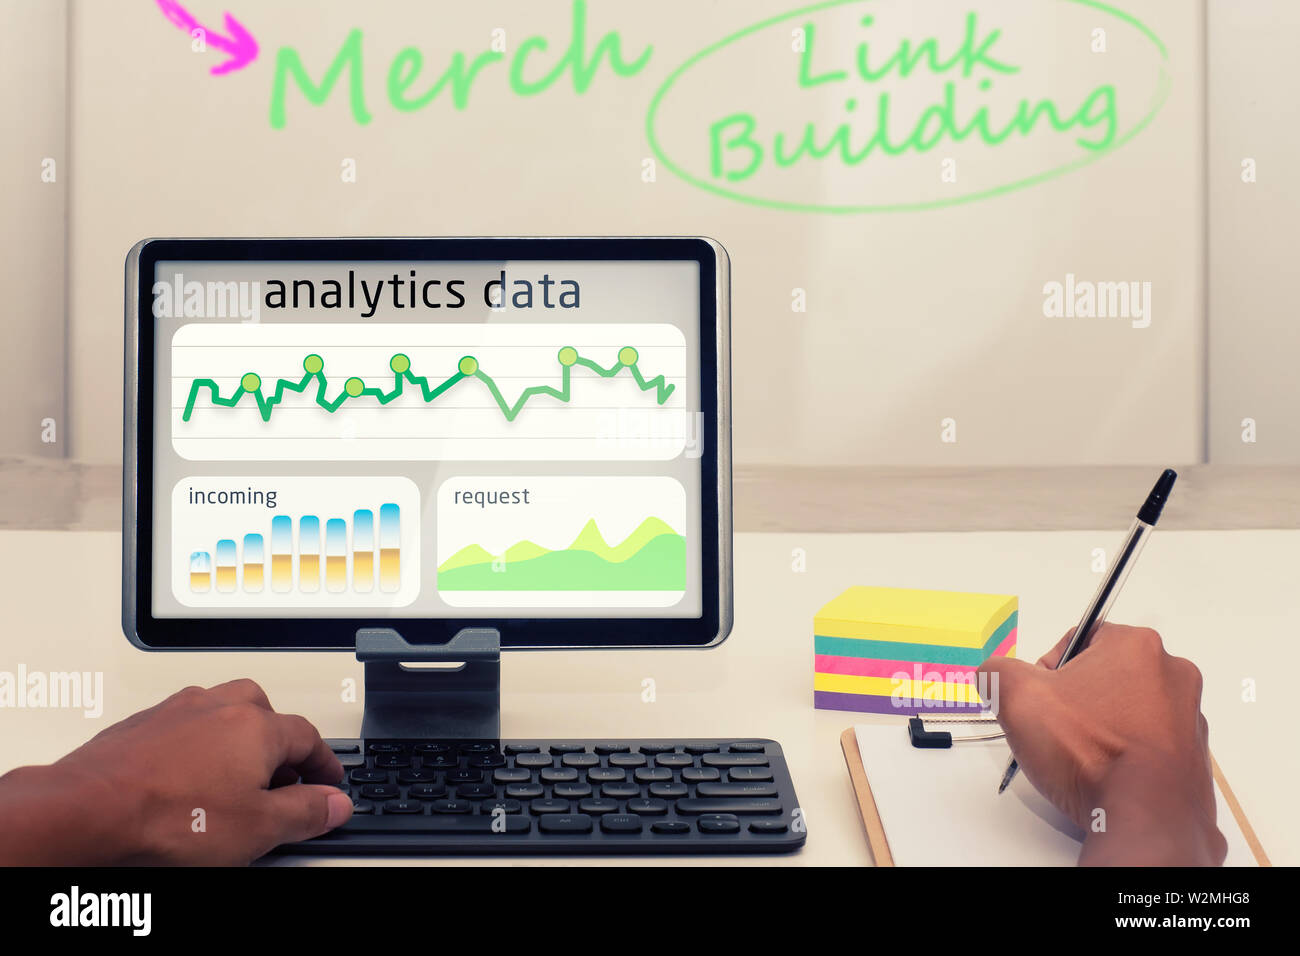 A business person working on analytics data on his mobile tablet and writing notes with a pen on paper. Stock Photo